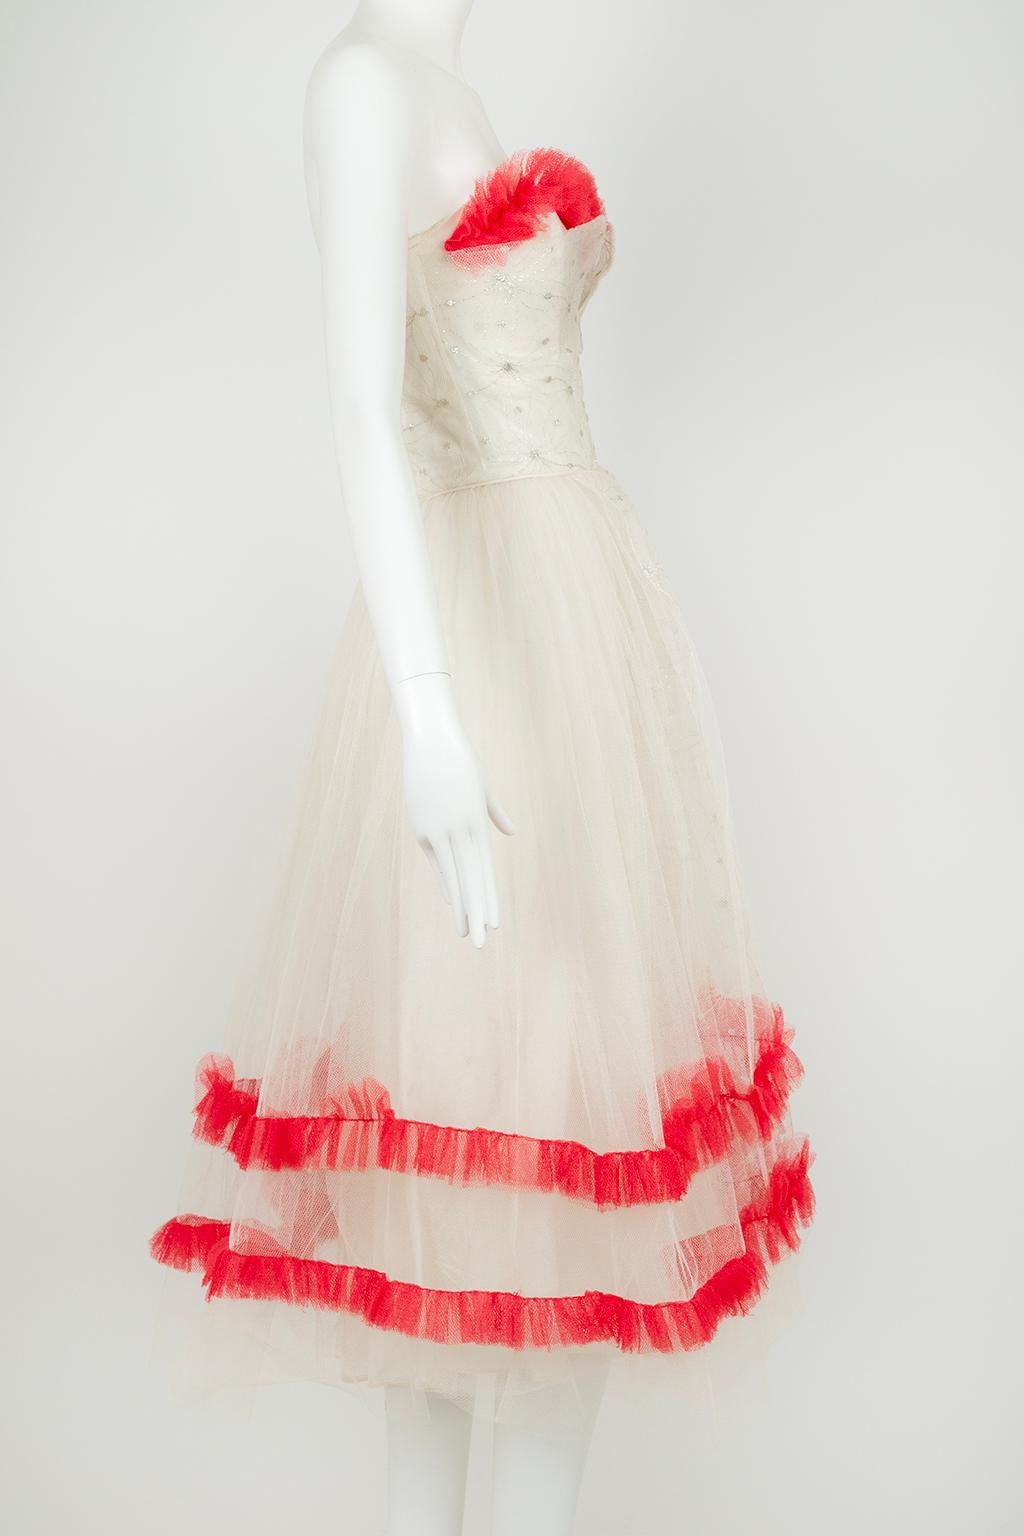 White and Silver Ballerina or Wedding Dress with Removable Red Trim – XS, 1950s 1